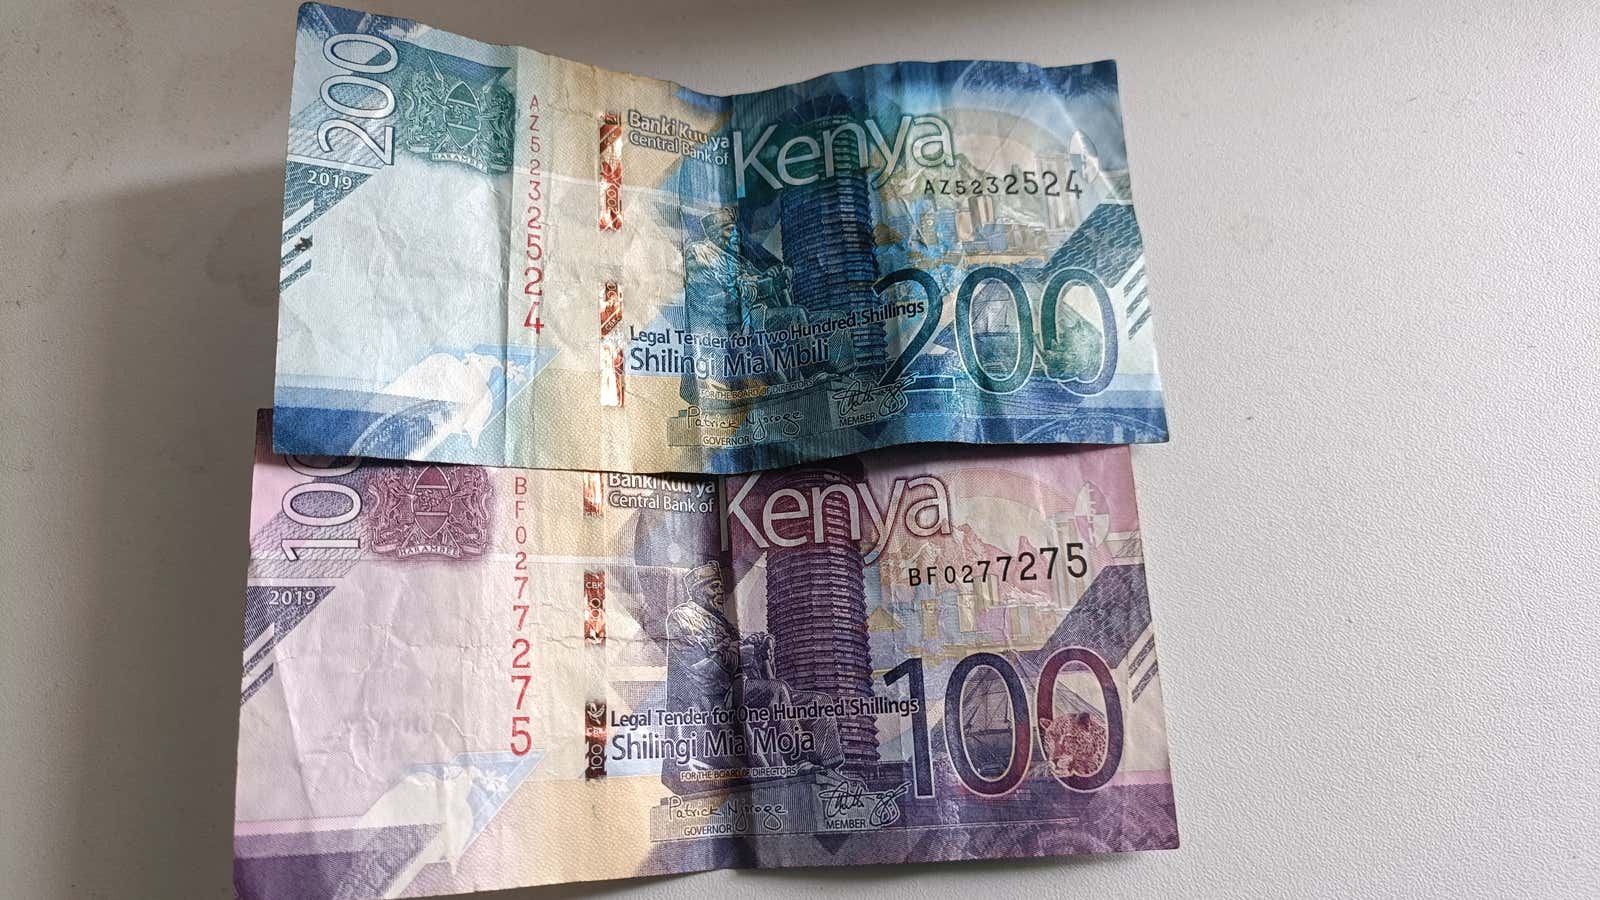 These banknotes have become a rare commodity in Kenyan banks